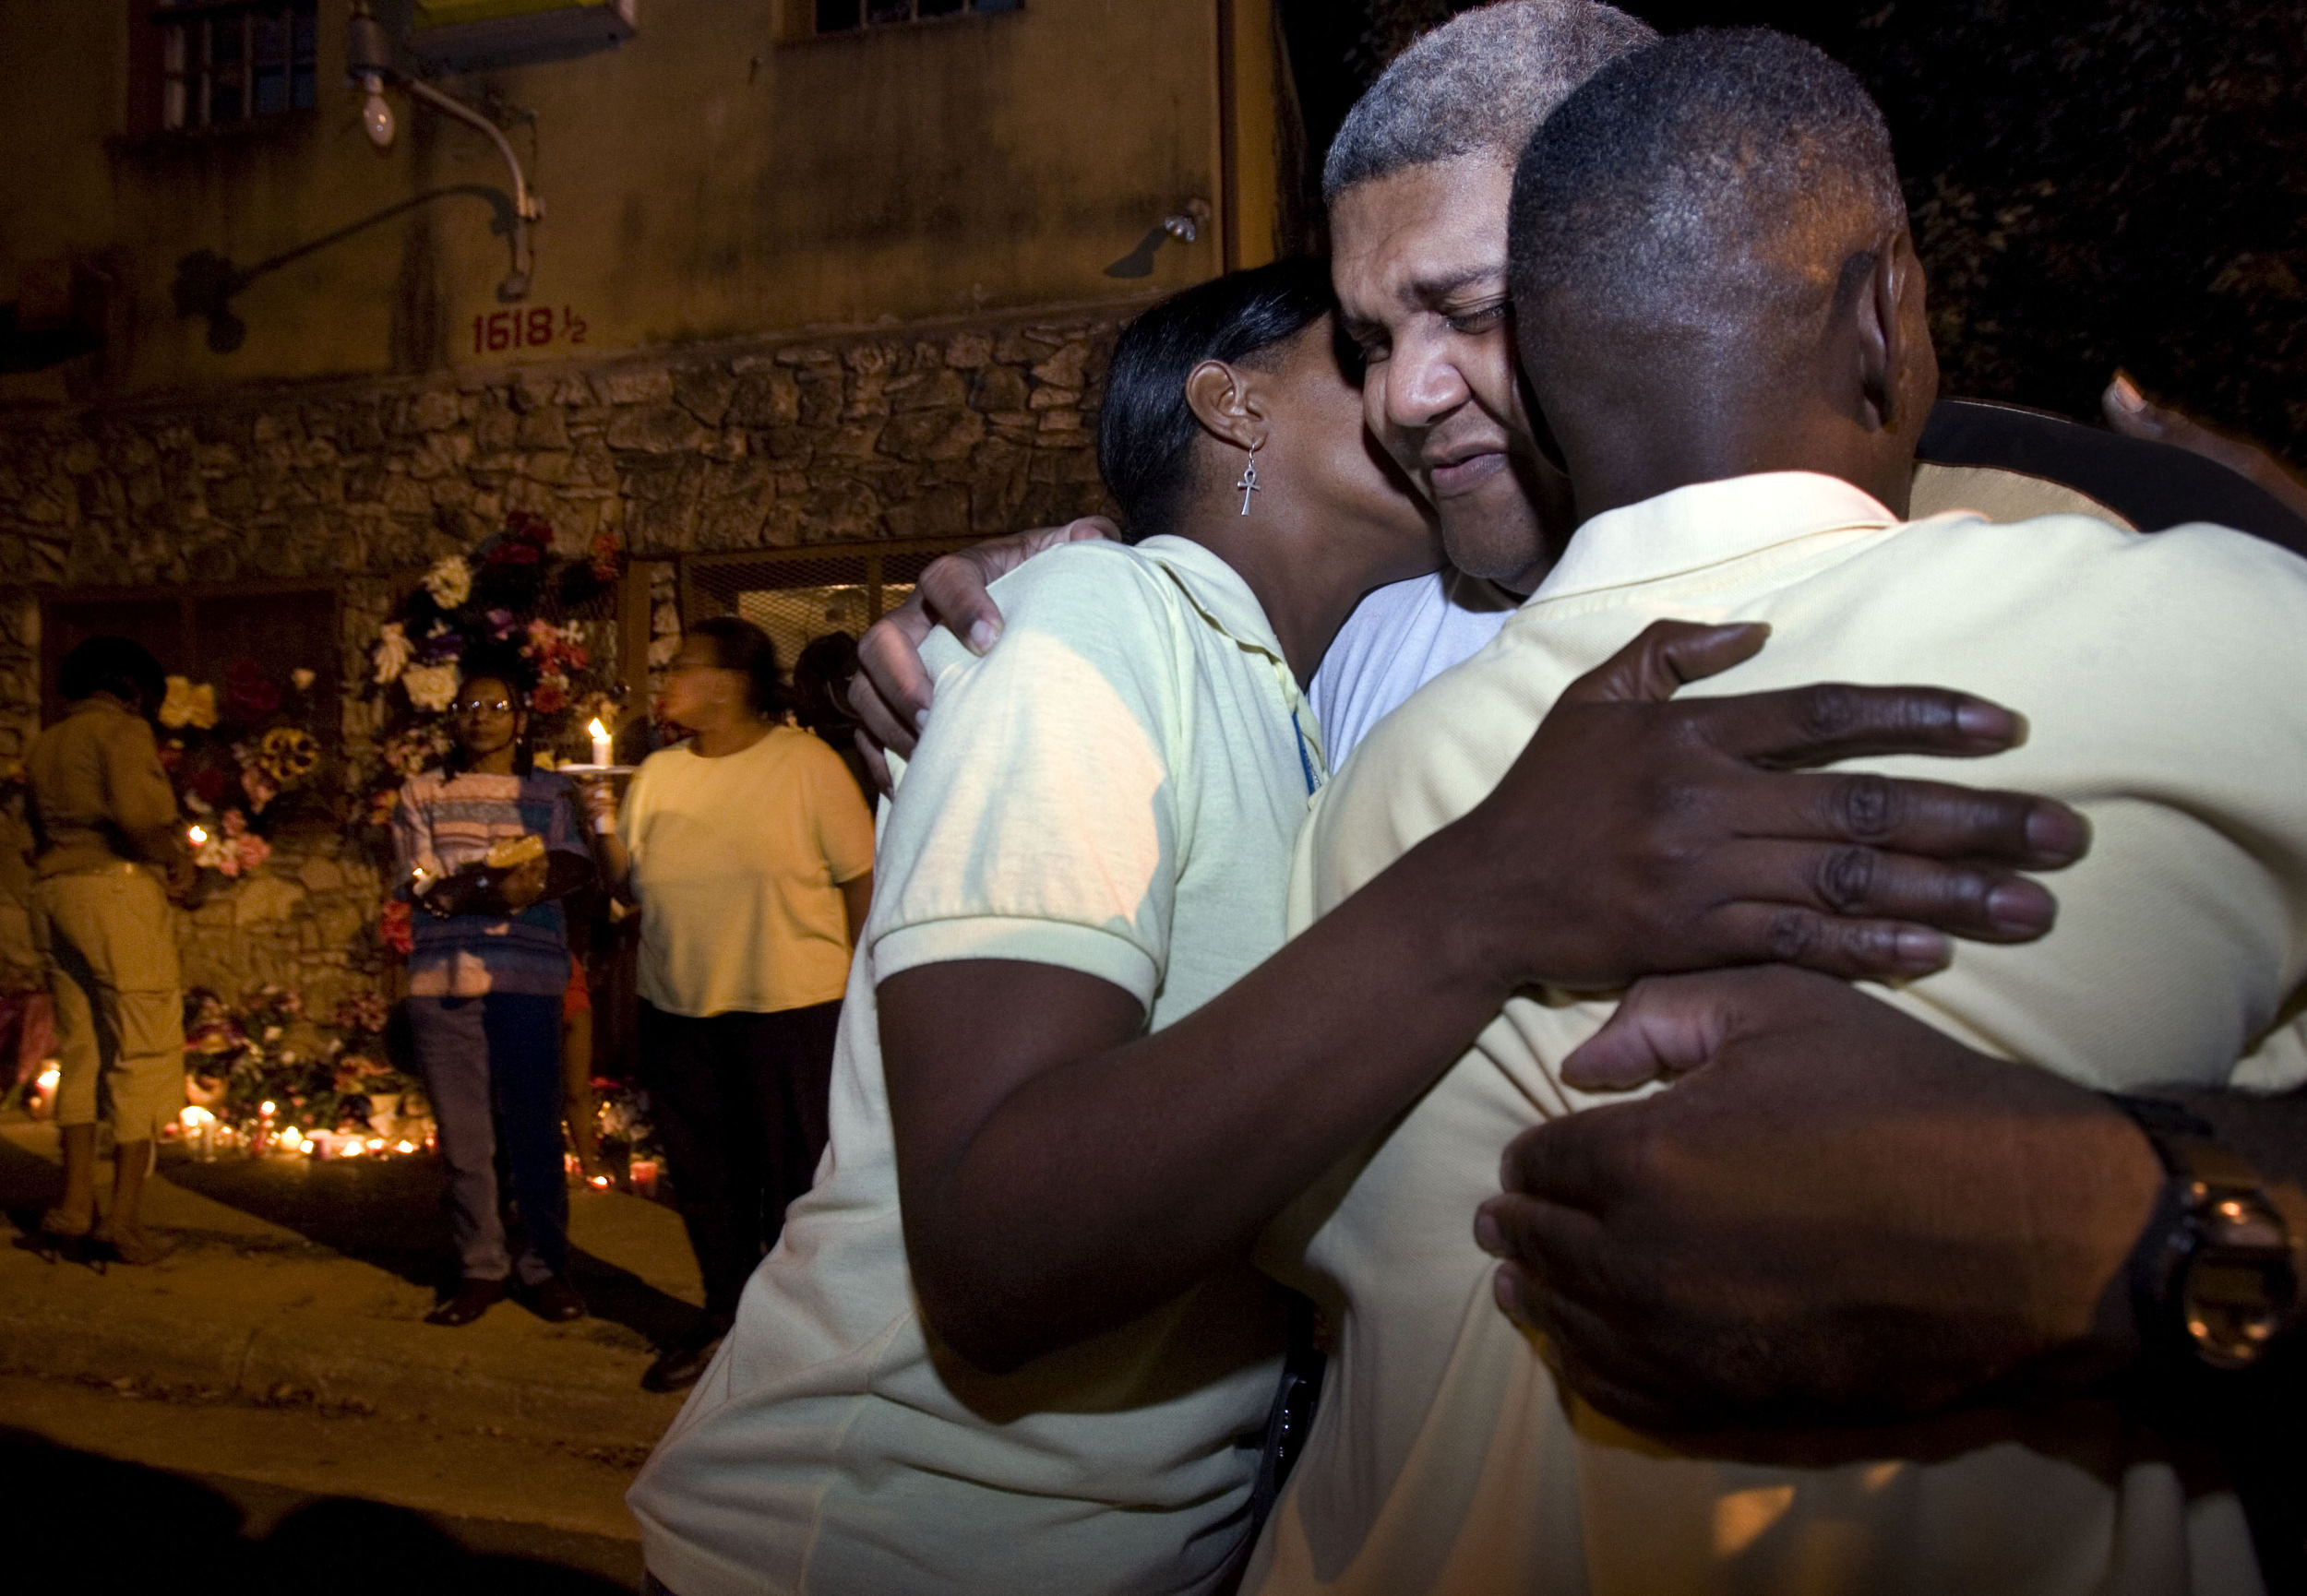  Ronald Wilson gets a hug in front of Cahal Market during a candlelight vigil for his mother Tuesday, October 9, 2007 in Nashville, Tenn. Classy Wilson, 70, a well-loved local and clerk at the market, was shot and killed by a middle schooler. 